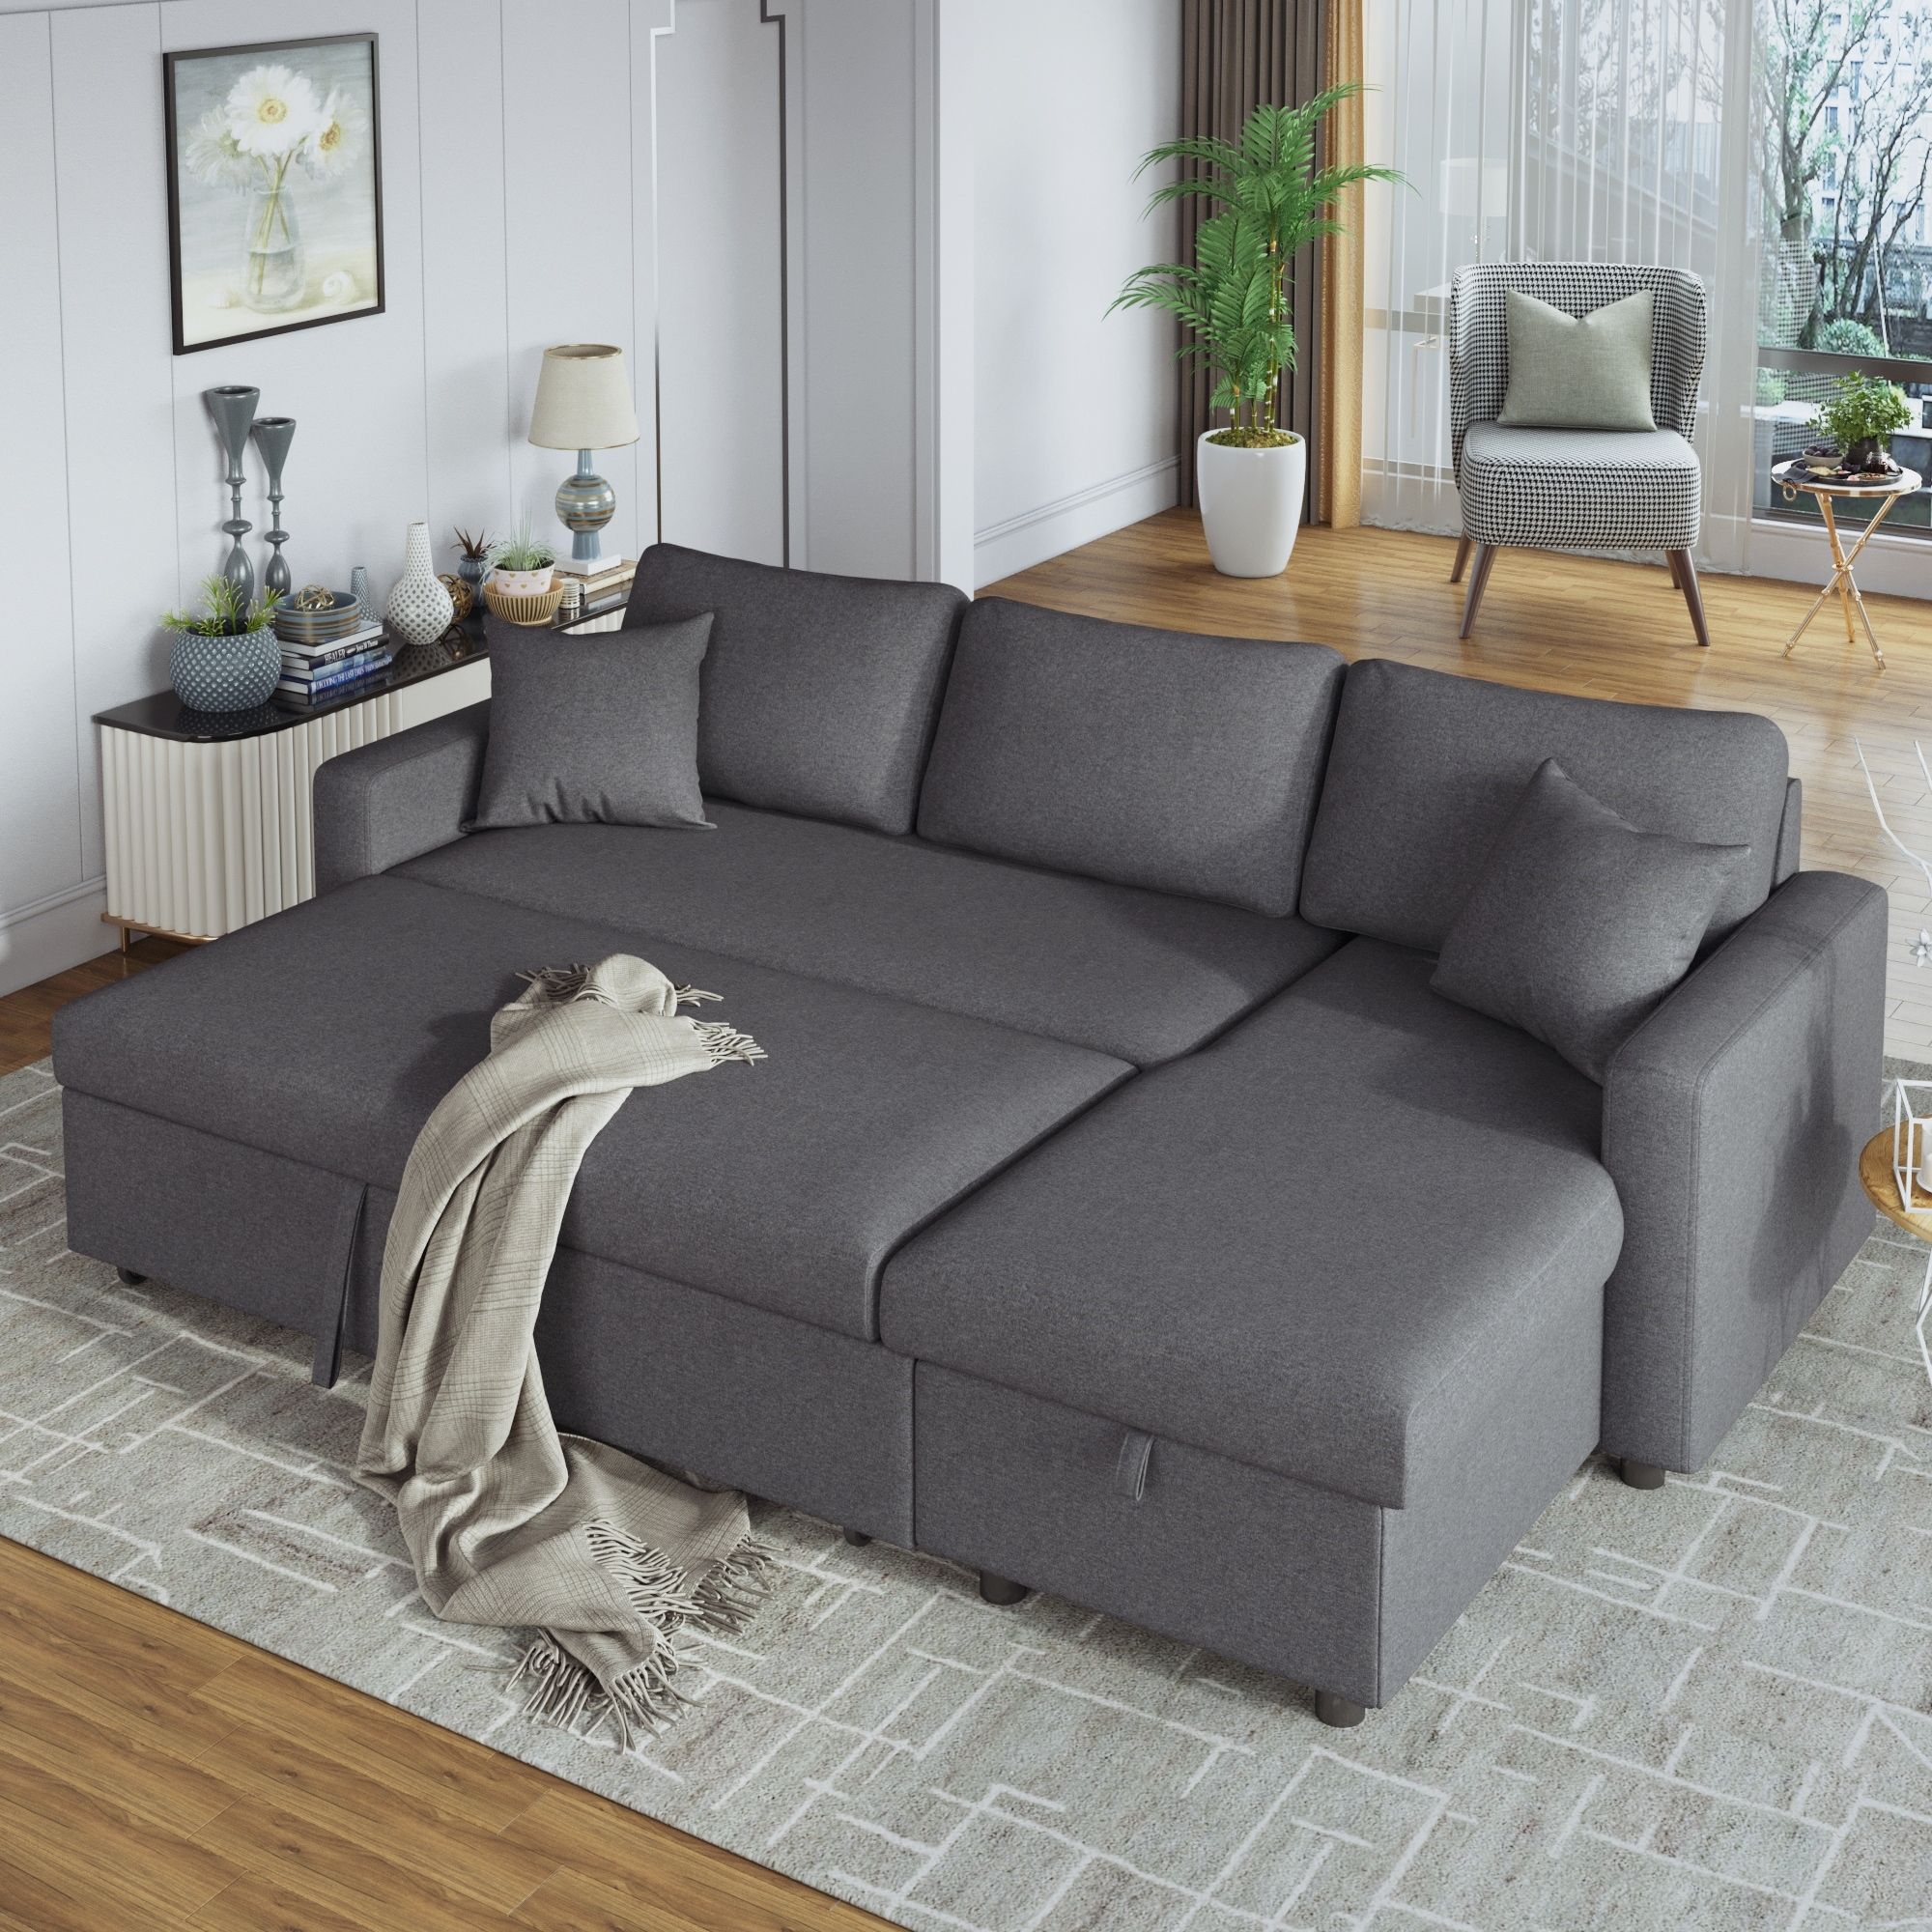 L Shape Sectional Sofa Modern Convertible Upholstered Twin Sofa Bed Sleeper  With Storage Sofa Chaise And 2 Tossing Cushions – Bed Bath & Beyond –  36781665 Within Convertible L Shaped Sectional Sofas (View 5 of 15)